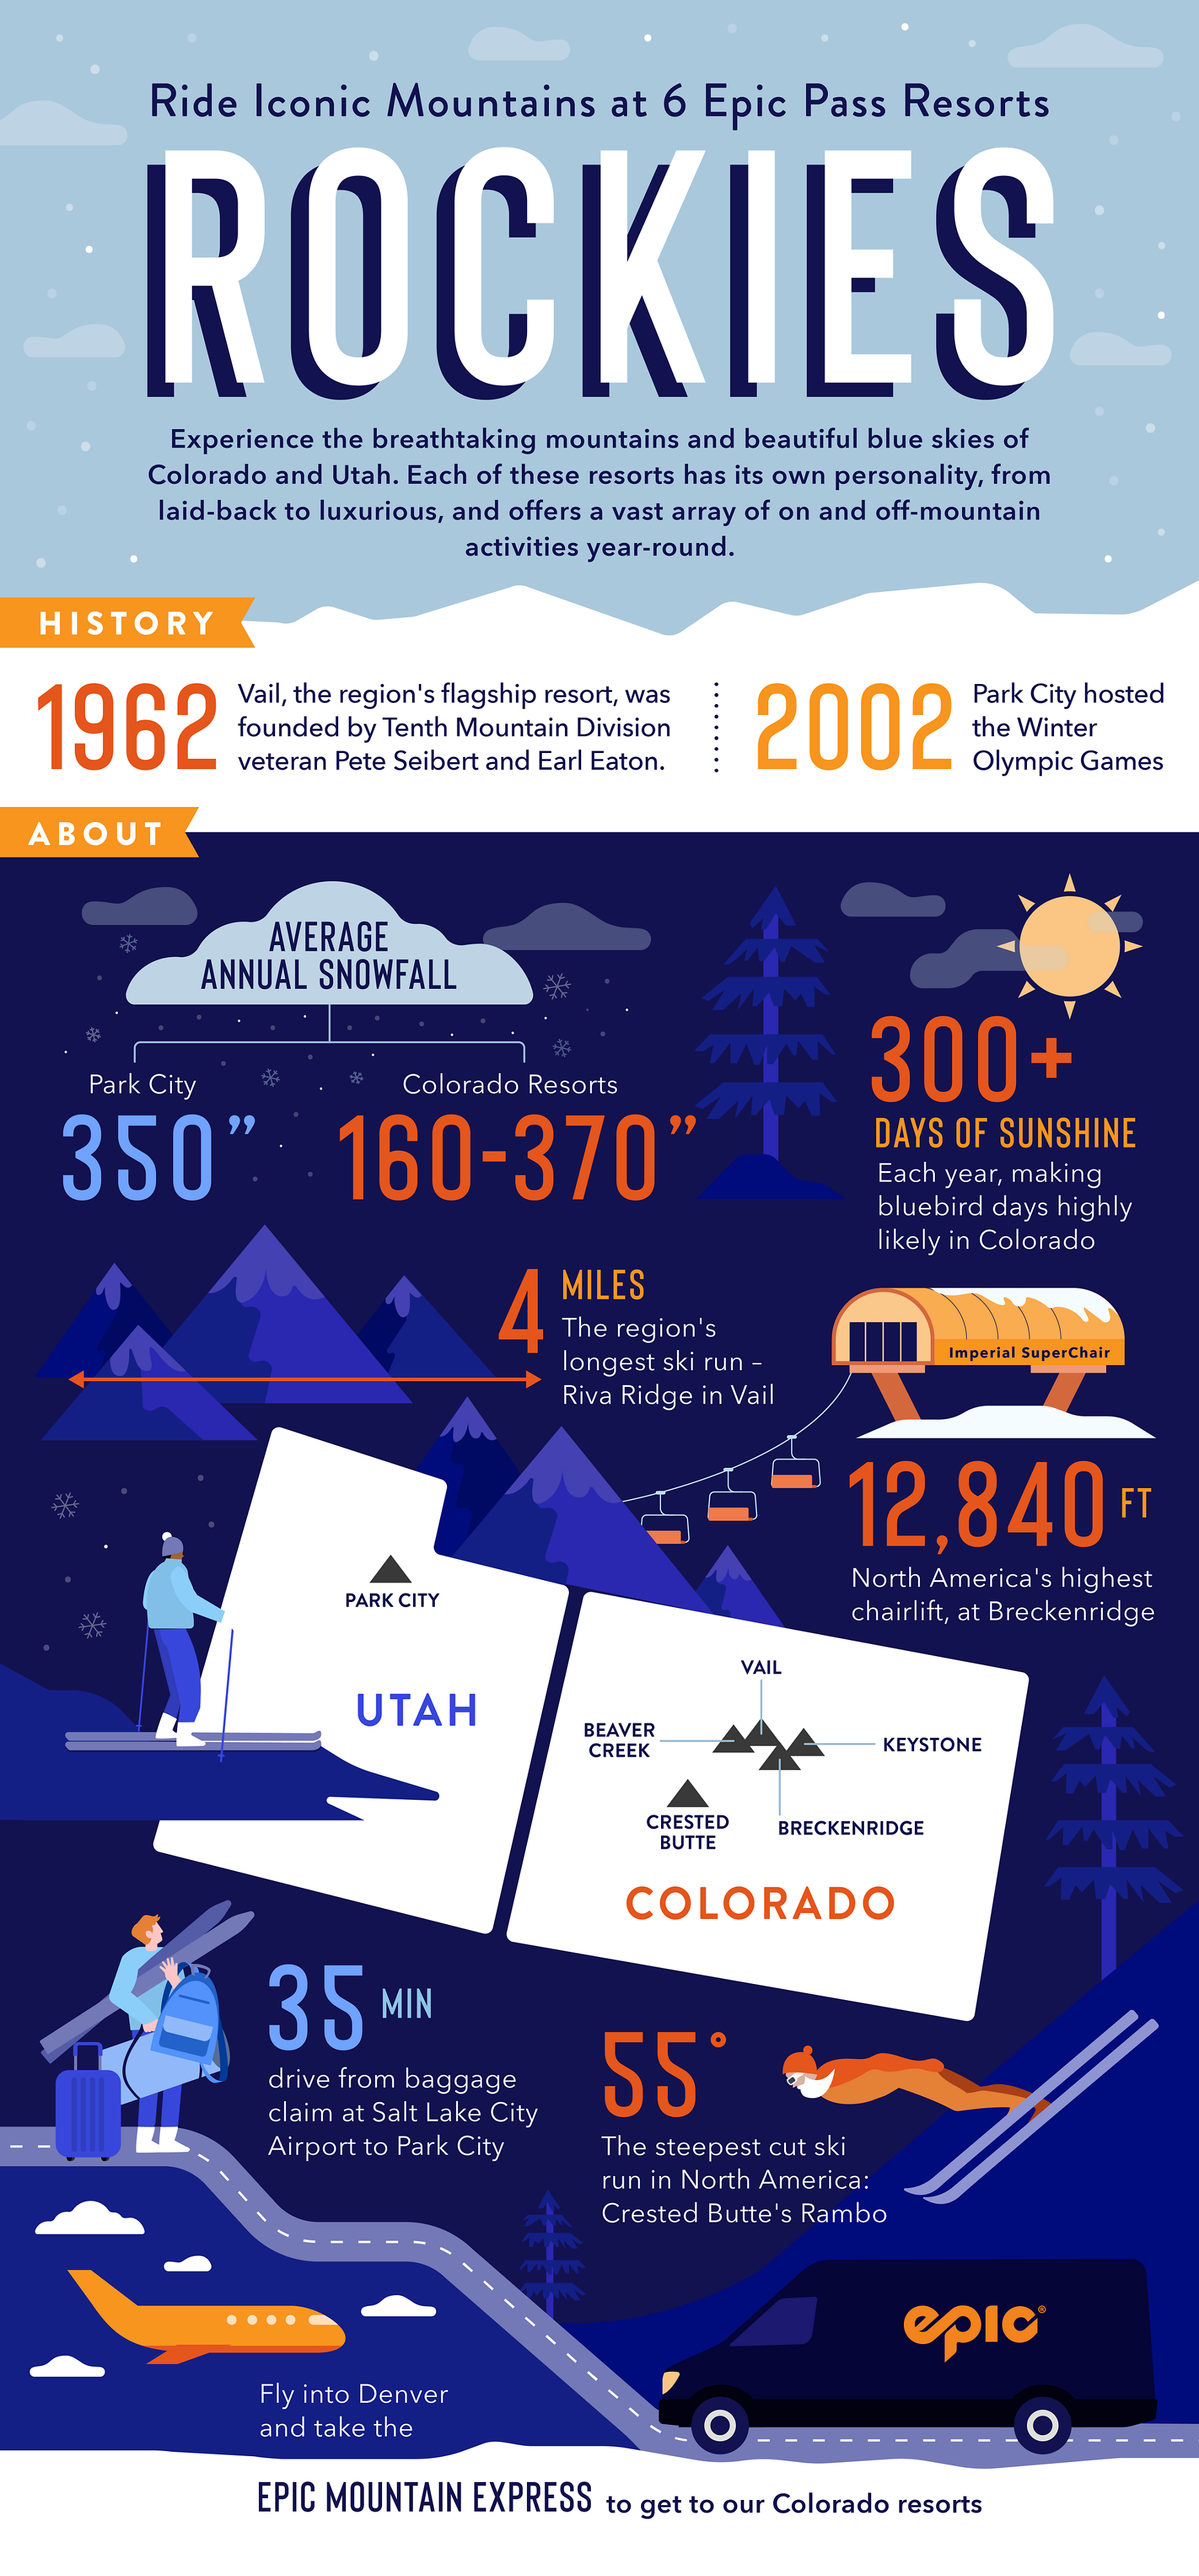 An infographic displaying facts about the rockies region history and what to find in the region. 300+ days of sunshine, 350" of snowfall in park city, and find the highest ski lift in Breckenridge.